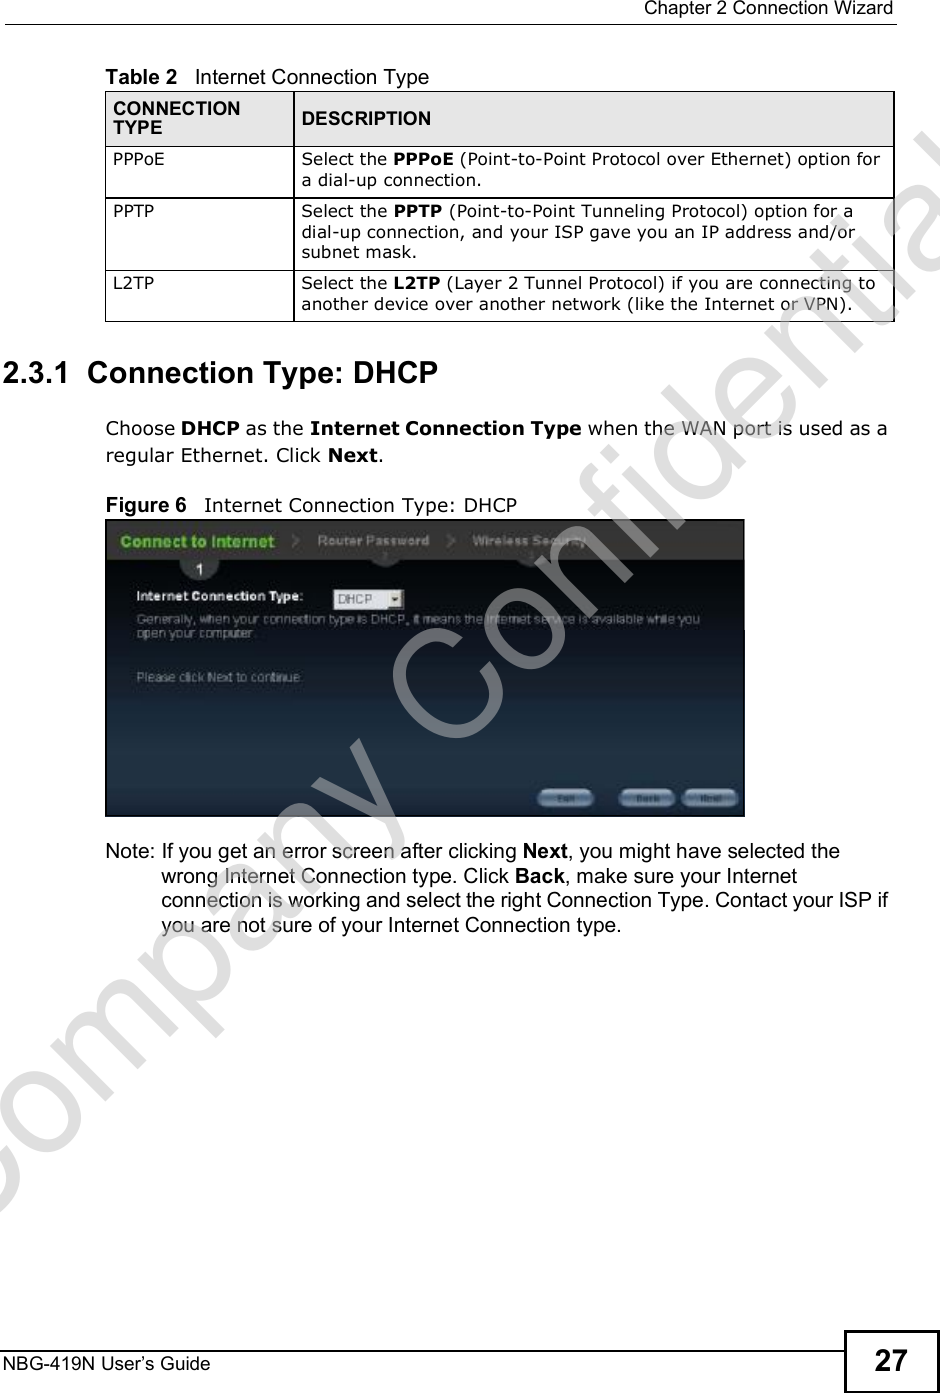  Chapter 2Connection WizardNBG-419N User s Guide 272.3.1  Connection Type: DHCP Choose DHCP as the Internet Connection Type when the WAN port is used as a regular Ethernet. Click Next.Figure 6   Internet Connection Type: DHCP Note: If you get an error screen after clicking Next, you might have selected the wrong Internet Connection type. Click Back, make sure your Internet connection is working and select the right Connection Type. Contact your ISP if you are not sure of your Internet Connection type.PPPoE Select the PPPoE (Point-to-Point Protocol over Ethernet) option for a dial-up connection.PPTPSelect the PPTP (Point-to-Point Tunneling Protocol) option for a dial-up connection, and your ISP gave you an IP address and/or subnet mask.L2TPSelect the L2TP (Layer 2 Tunnel Protocol) if you are connecting to another device over another network (like the Internet or VPN).Table 2   Internet Connection TypeCONNECTION TYPE DESCRIPTIONCompany Confidential